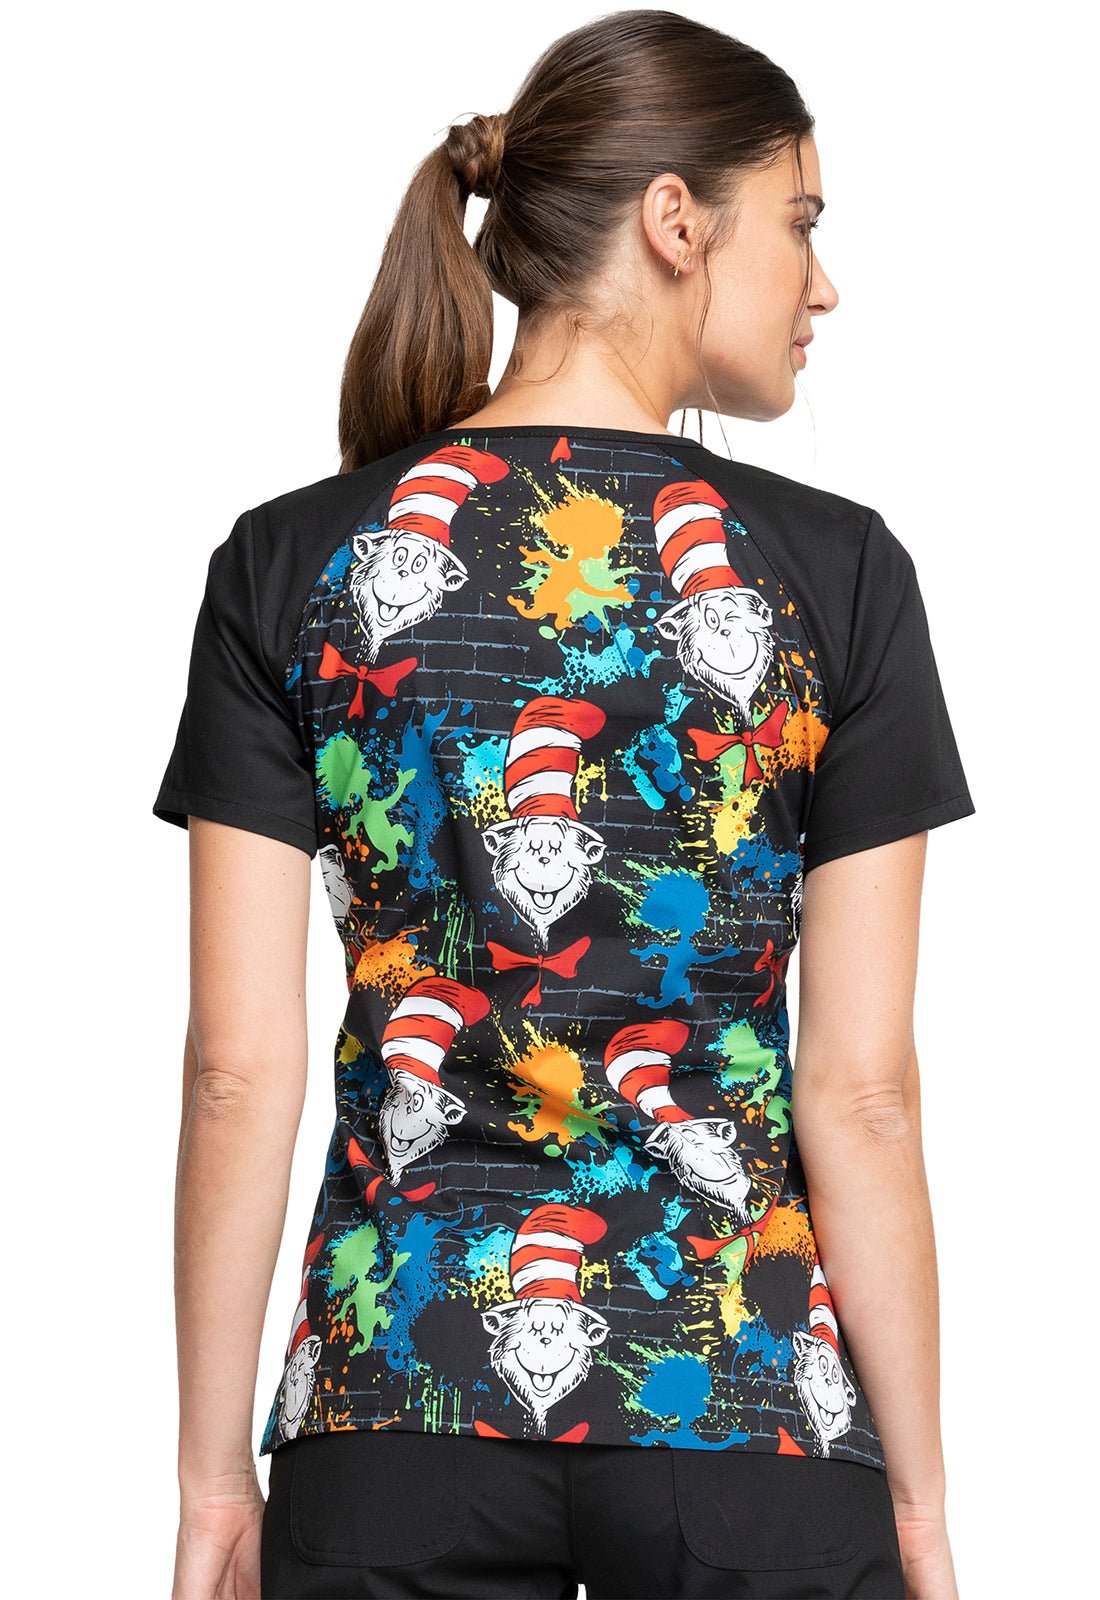 Cat in The Hat Cherokee Tooniforms Licensed Dr Seuss V Neck Medical Scrub Top TF632 SEFF - Scrubs Select